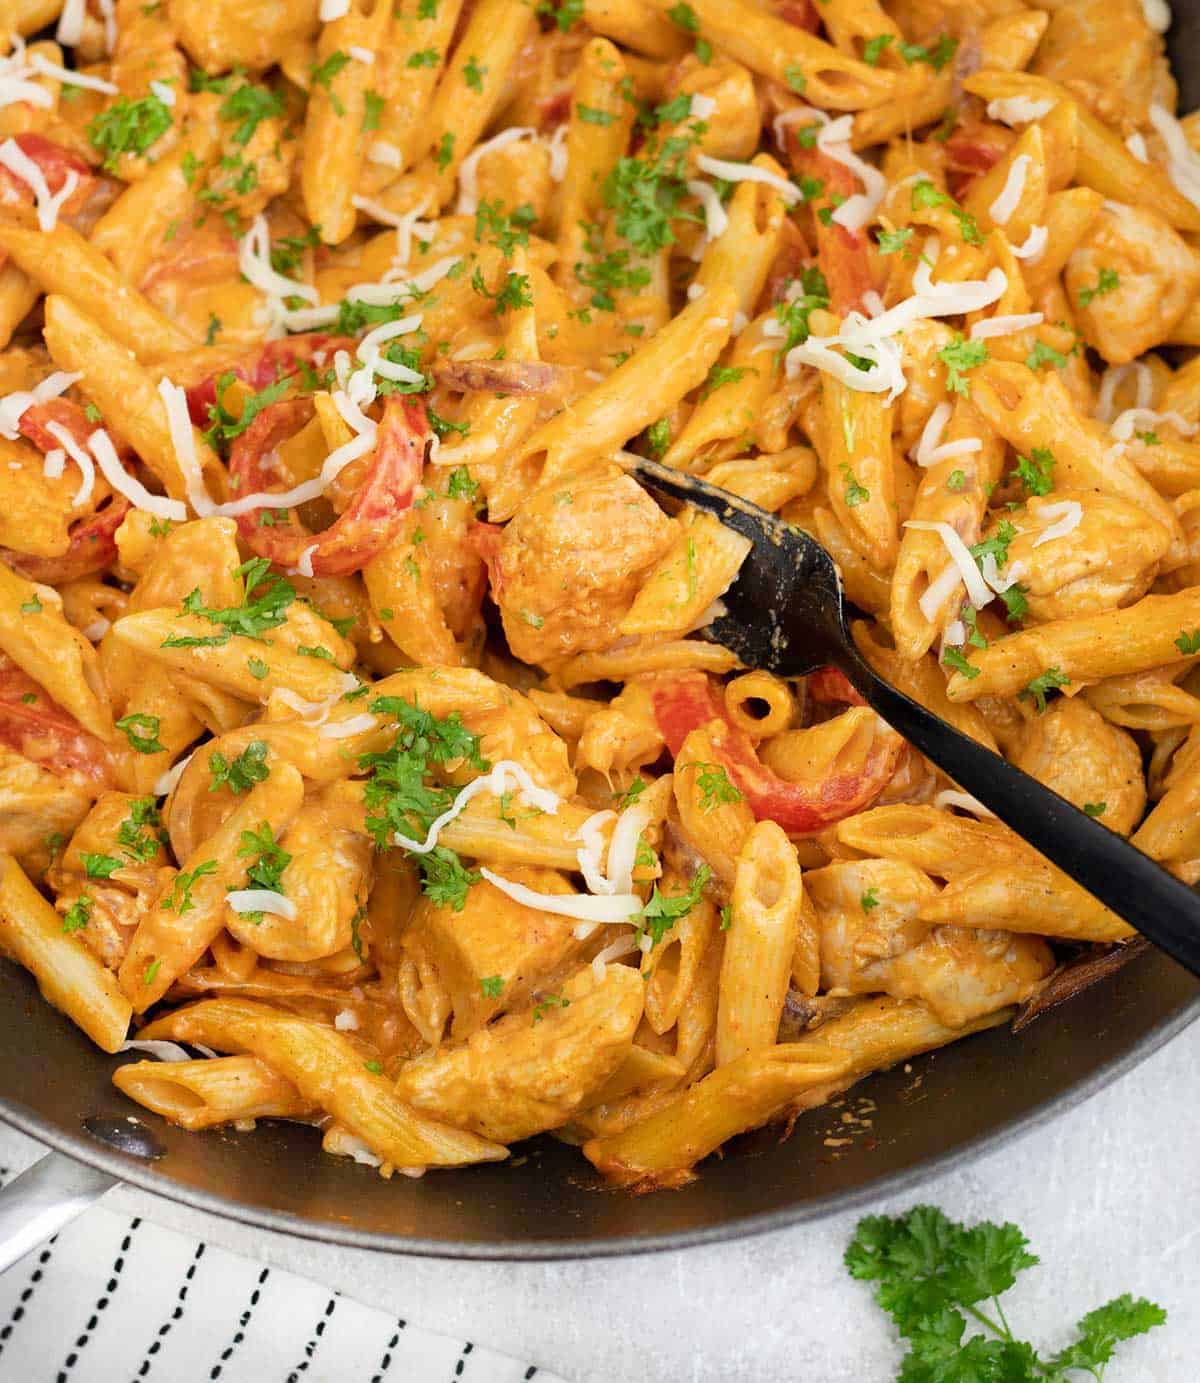 BBQ Chicken Pasta topped with Parsley in a pan.